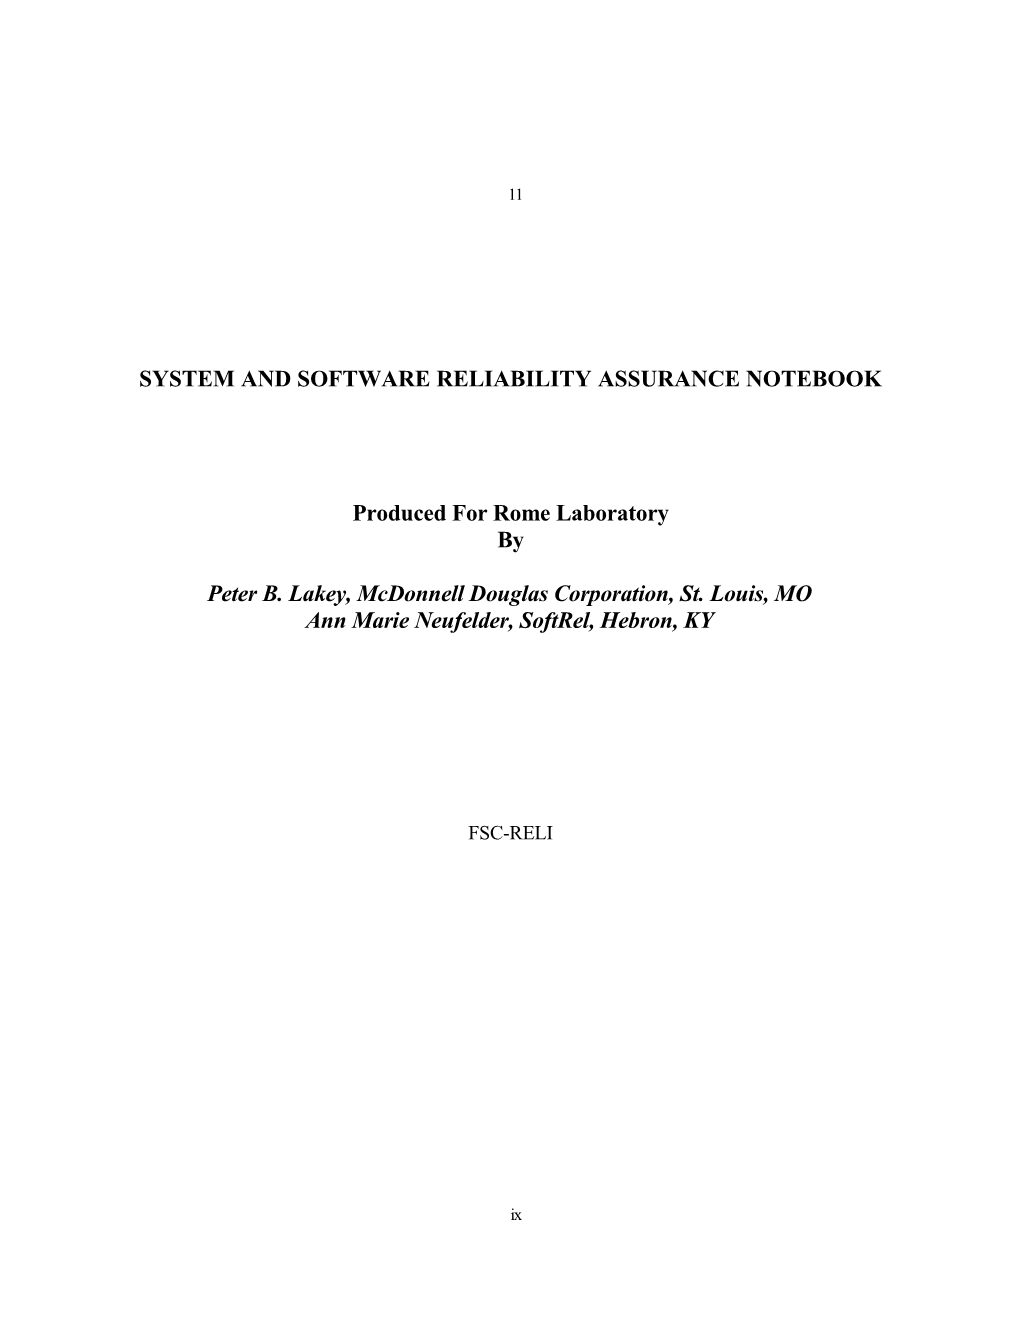 System and Software Reliability Assurance Notebook